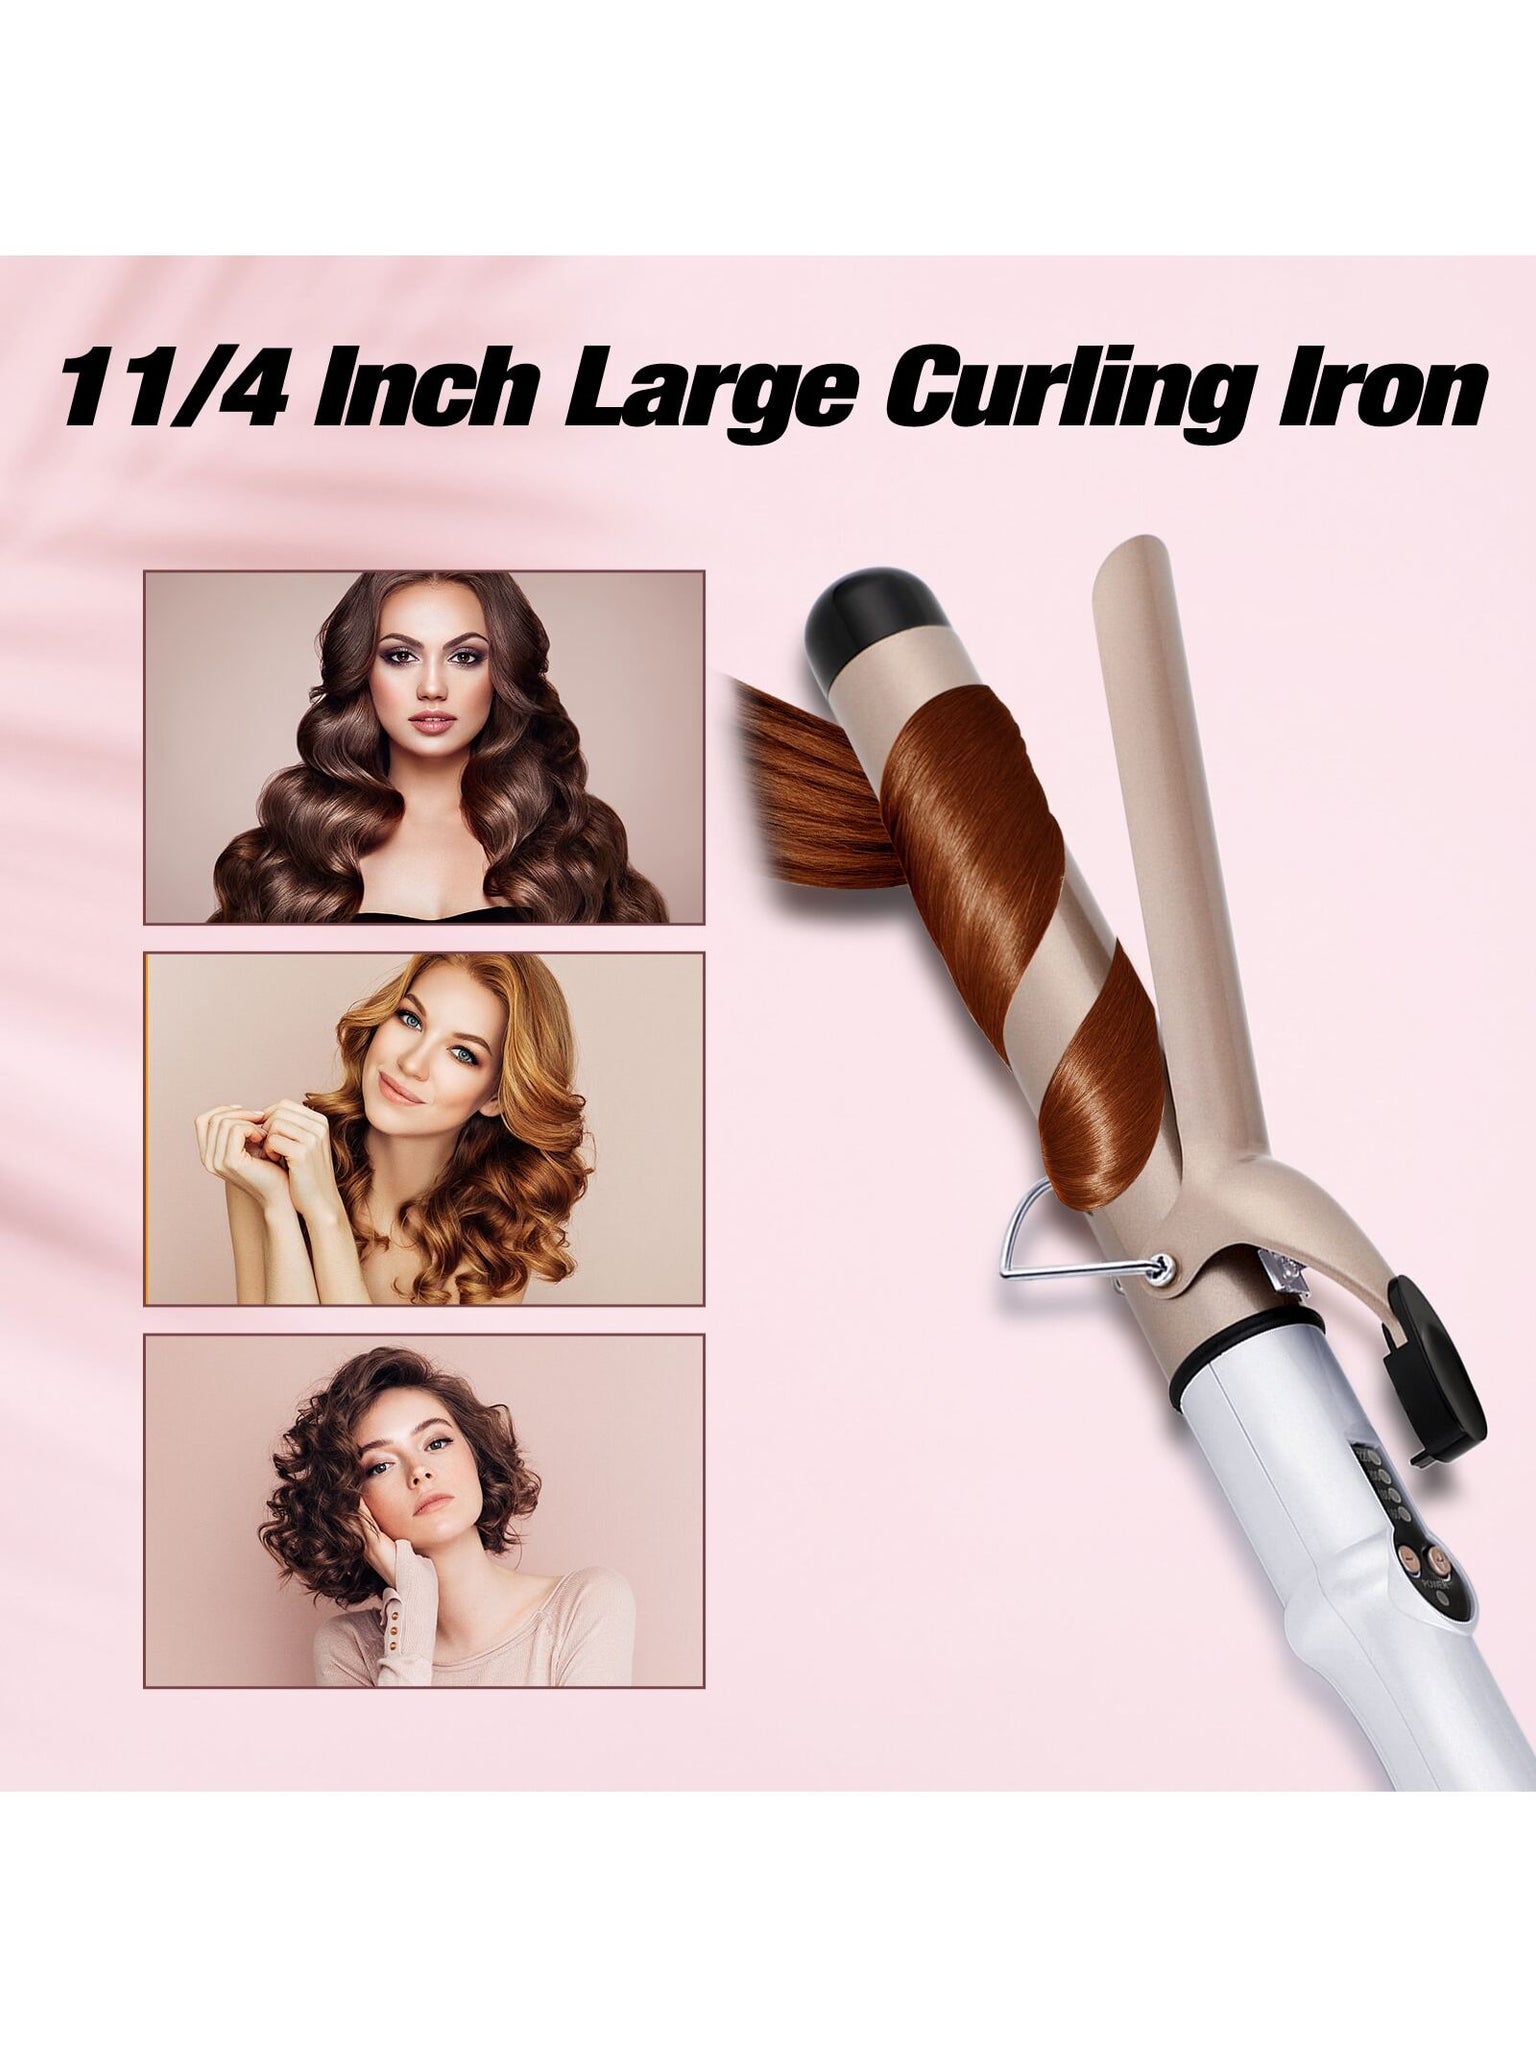 1 1/4 Inch Curling Iron 32mm Professional Ceramic Tourmaline Coating Barrel Hair Curler, LCD Display with 4 Heat Setting (160 Celsius-220 Celsius)for All Hair Types, Glove Include-White-2